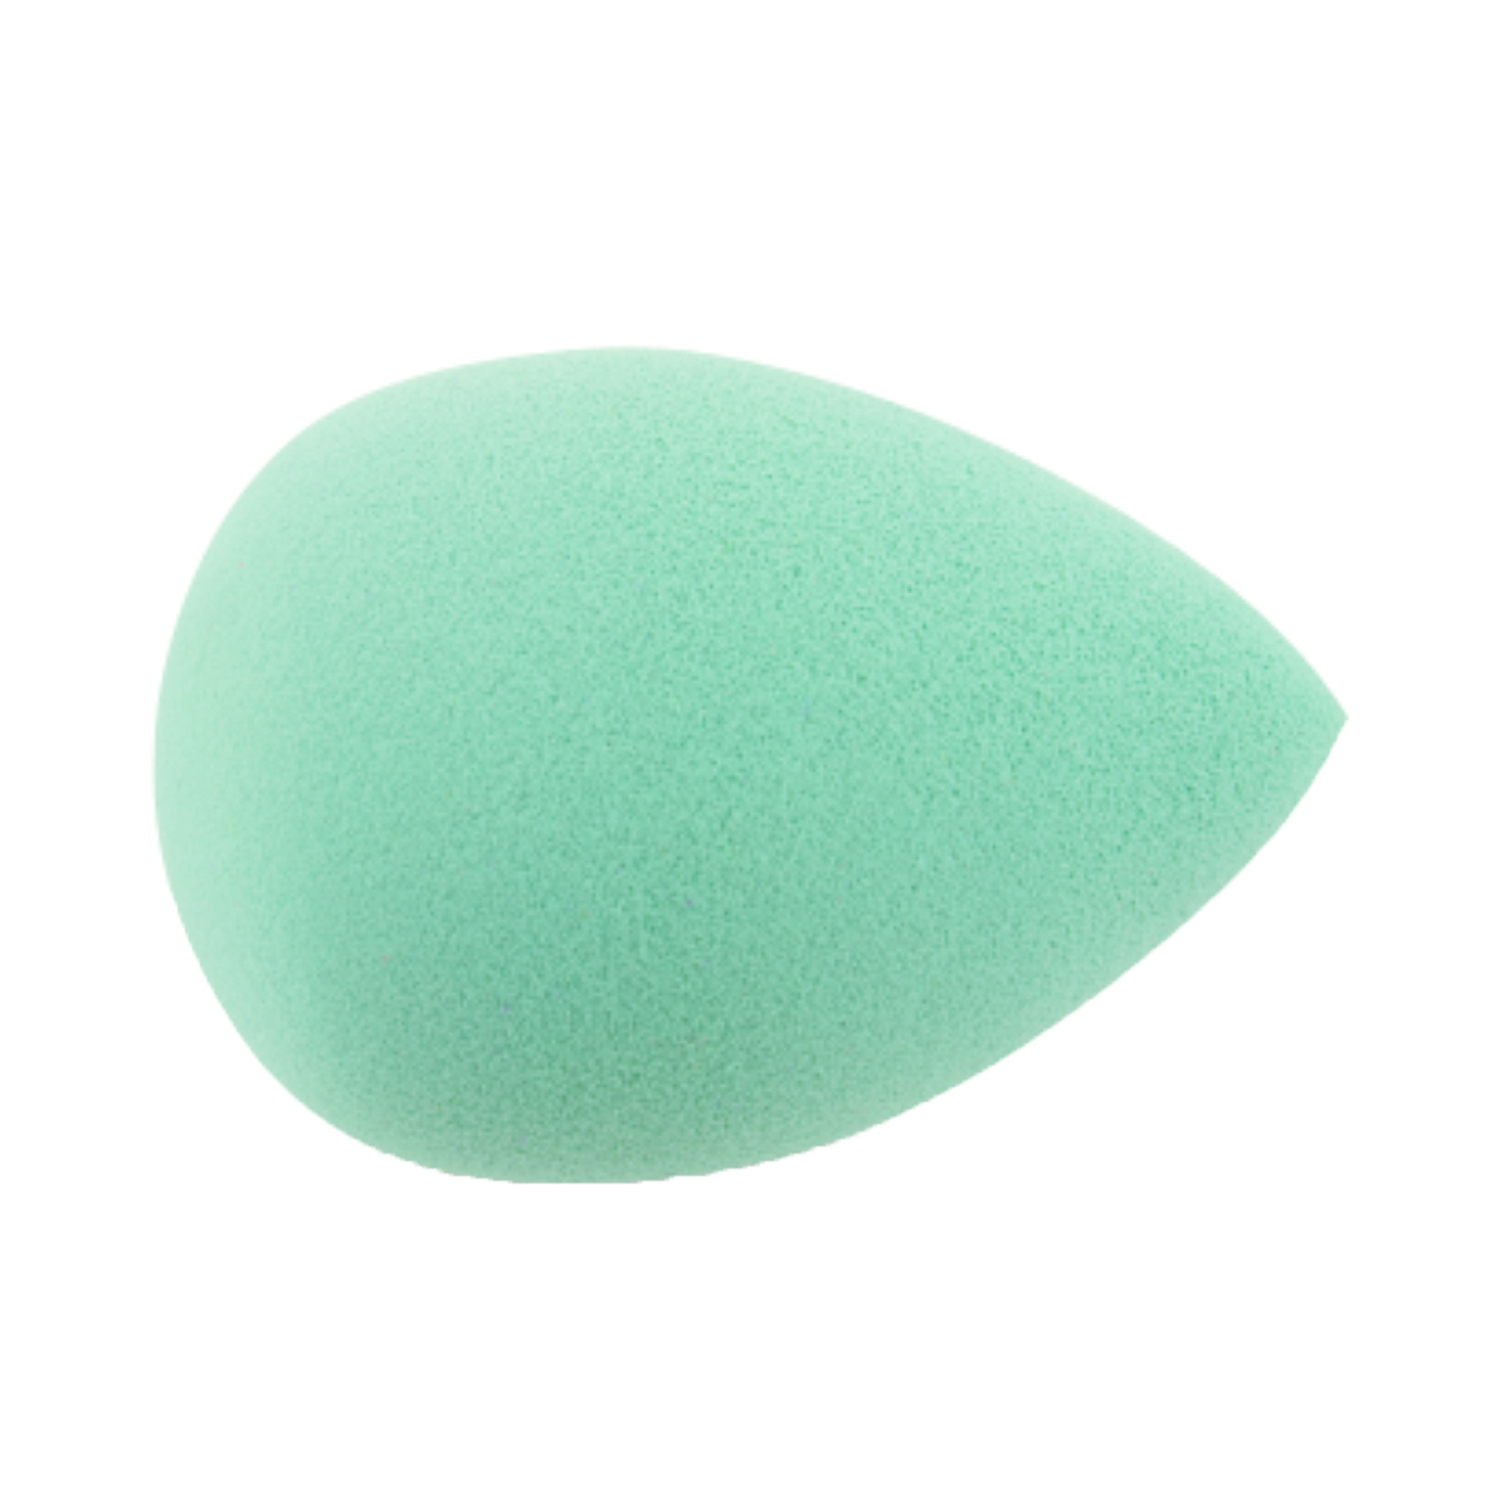 OFRA | OFRA Perfecting Puff (1 Pc)